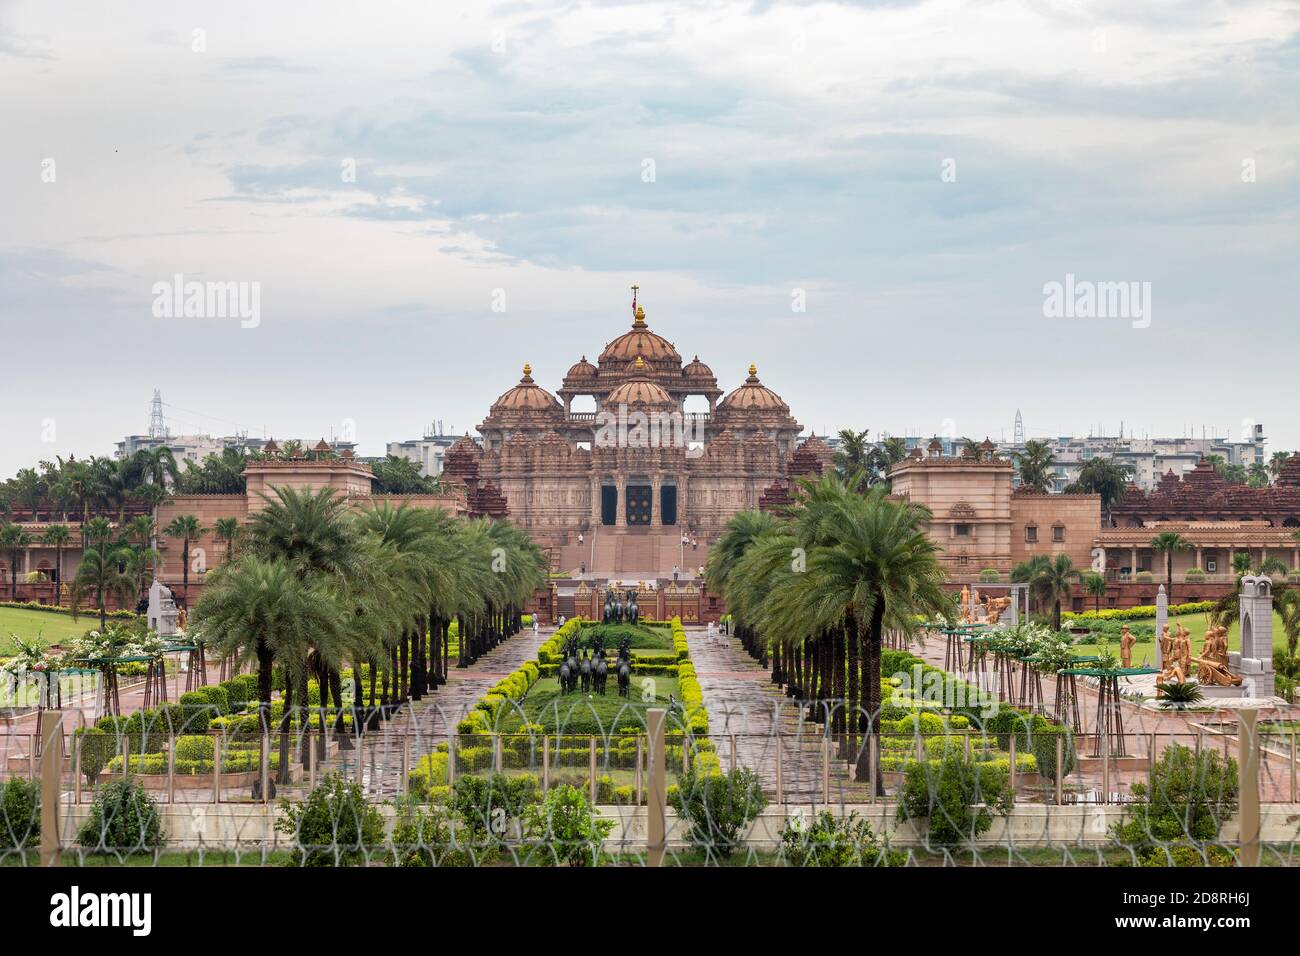 View of the famous Akshardham temple in New Delhi. Stock Photo